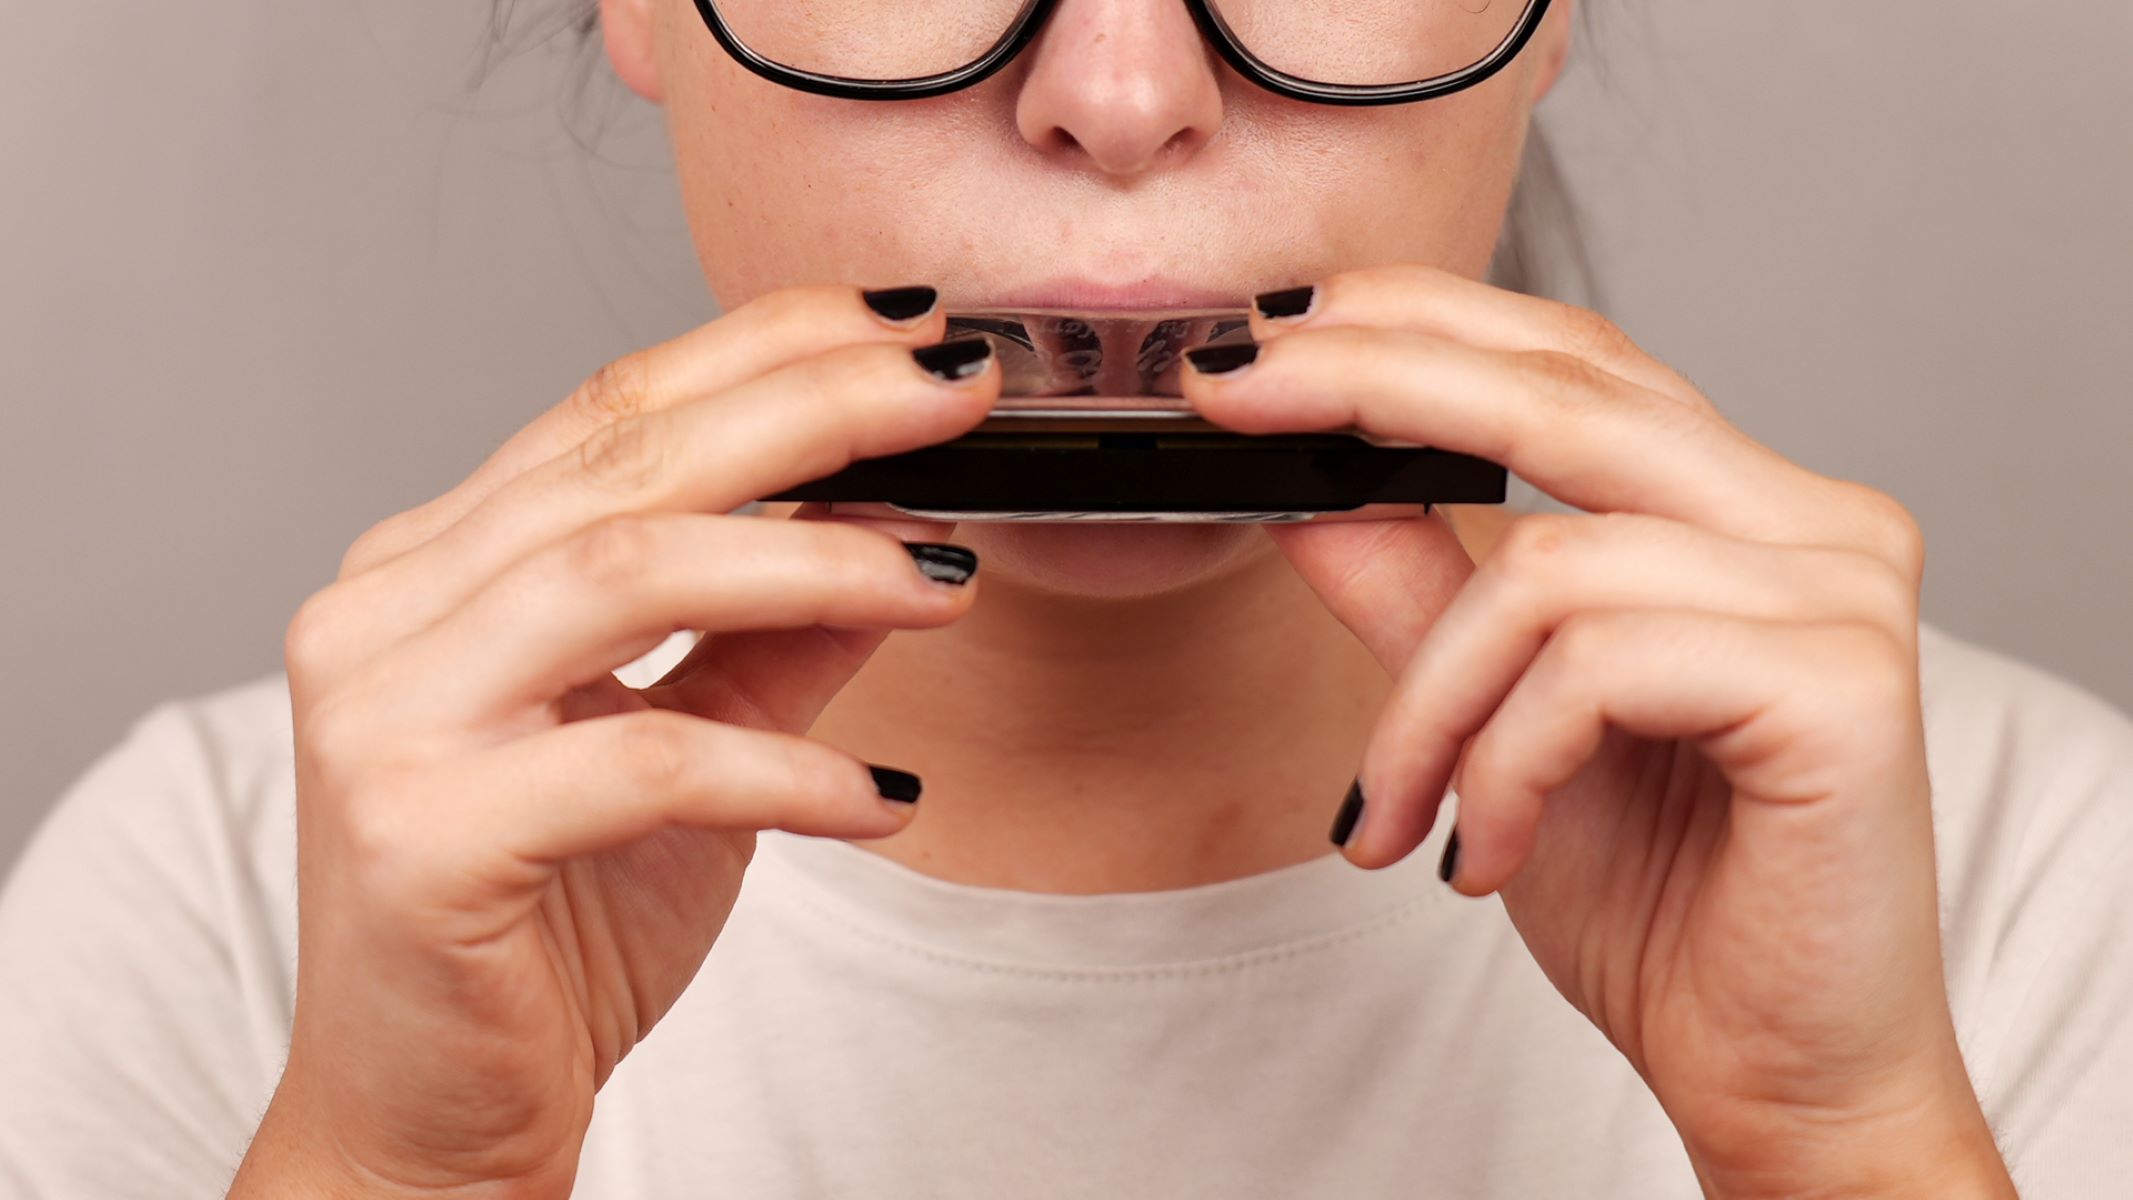 How To Play One Note On Harmonica